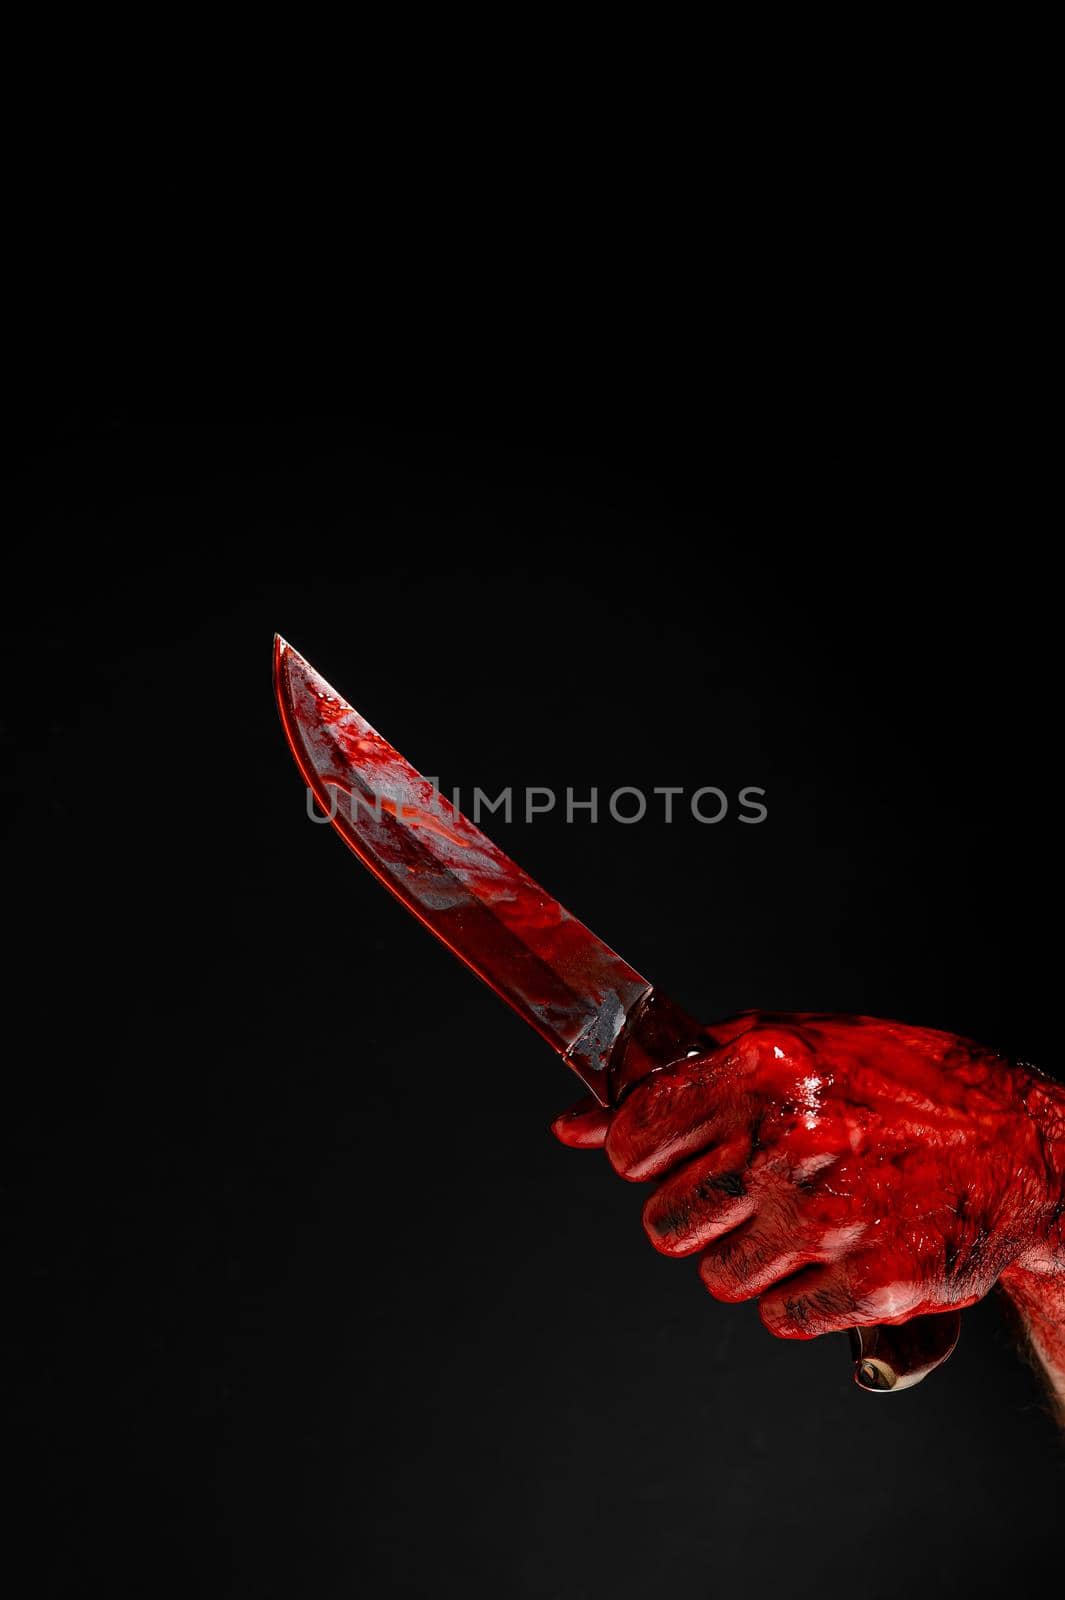 A man with bloody hands brandishes a knife on a black background. by mrwed54